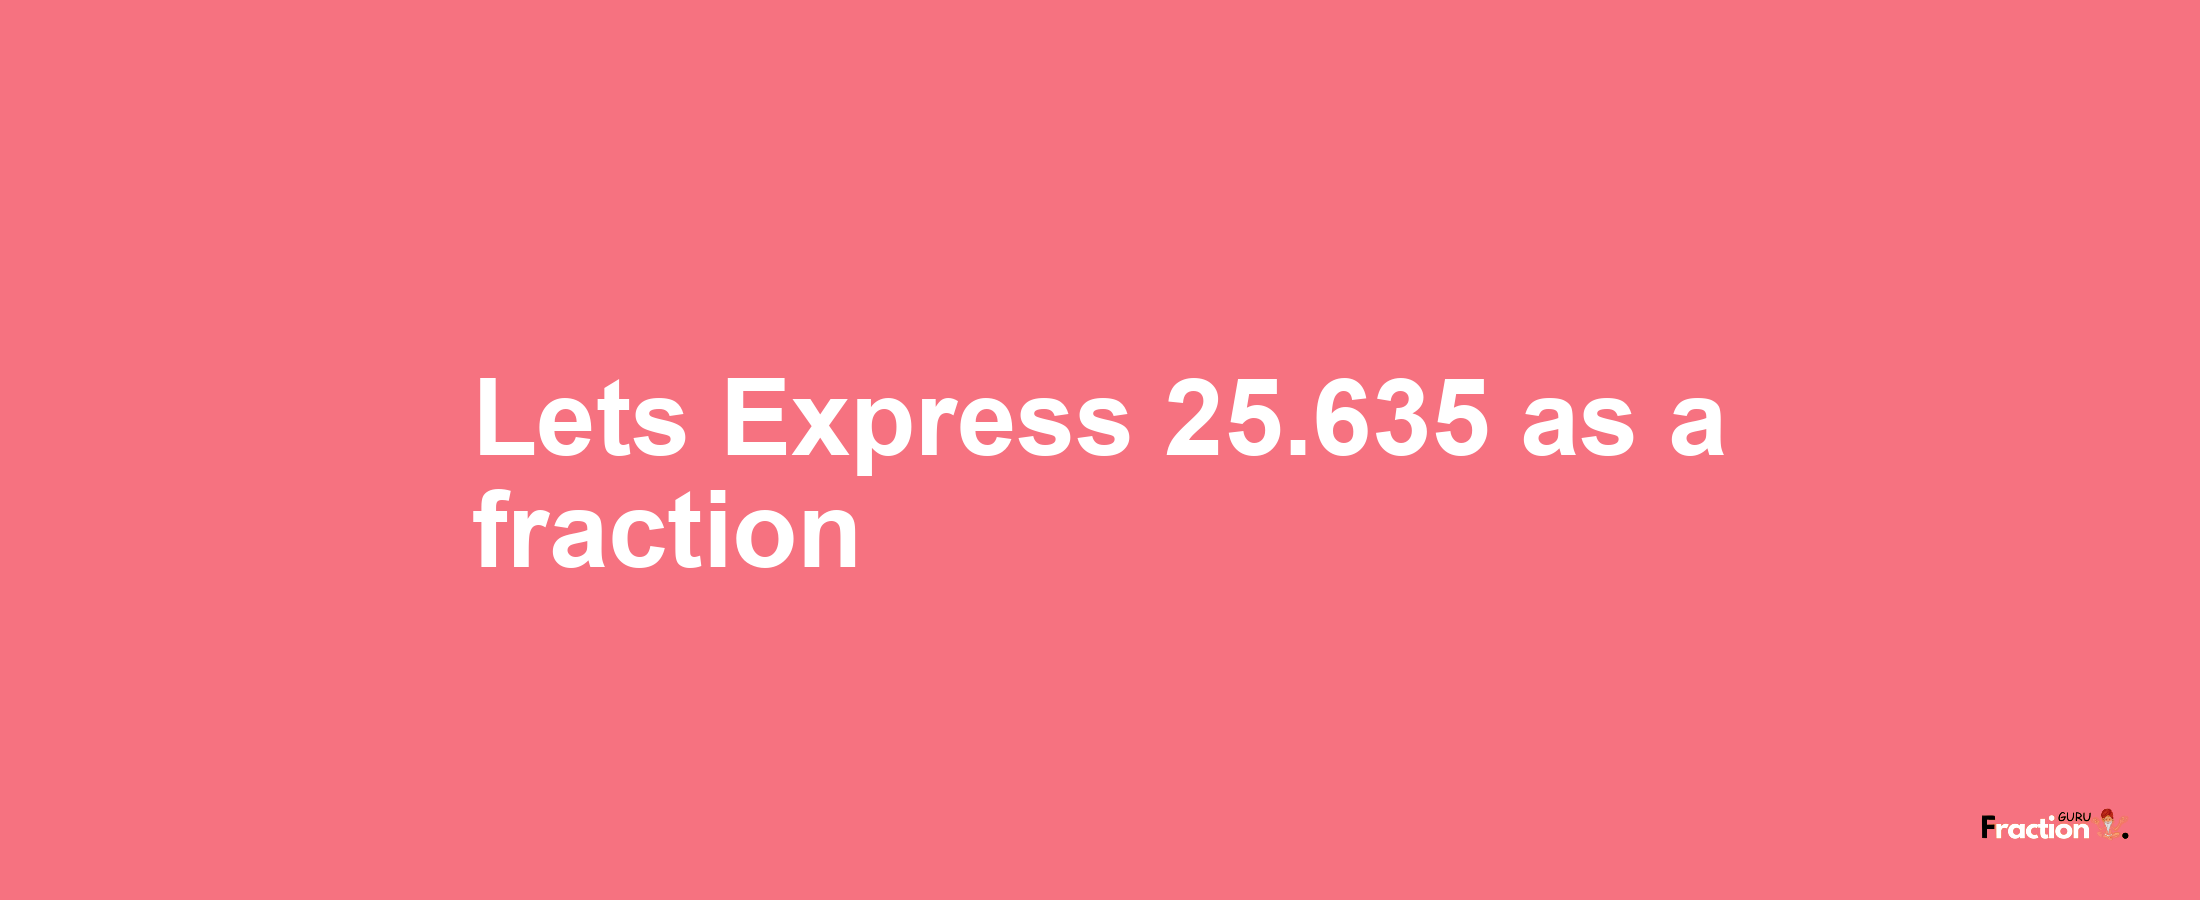 Lets Express 25.635 as afraction